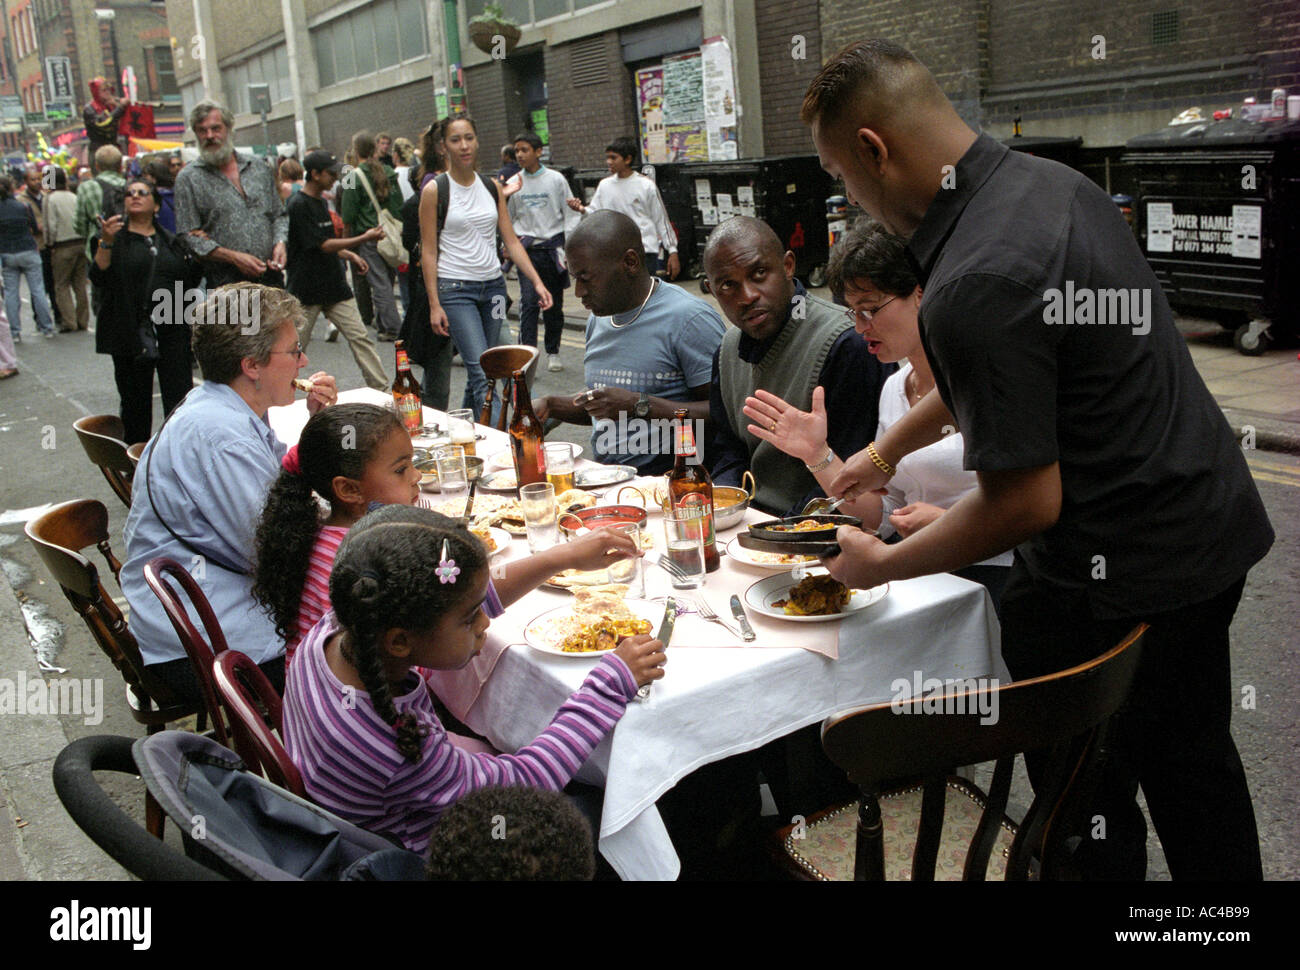 Family having a meal in Brick Lane London during the Bangladesh summer festival. Stock Photo